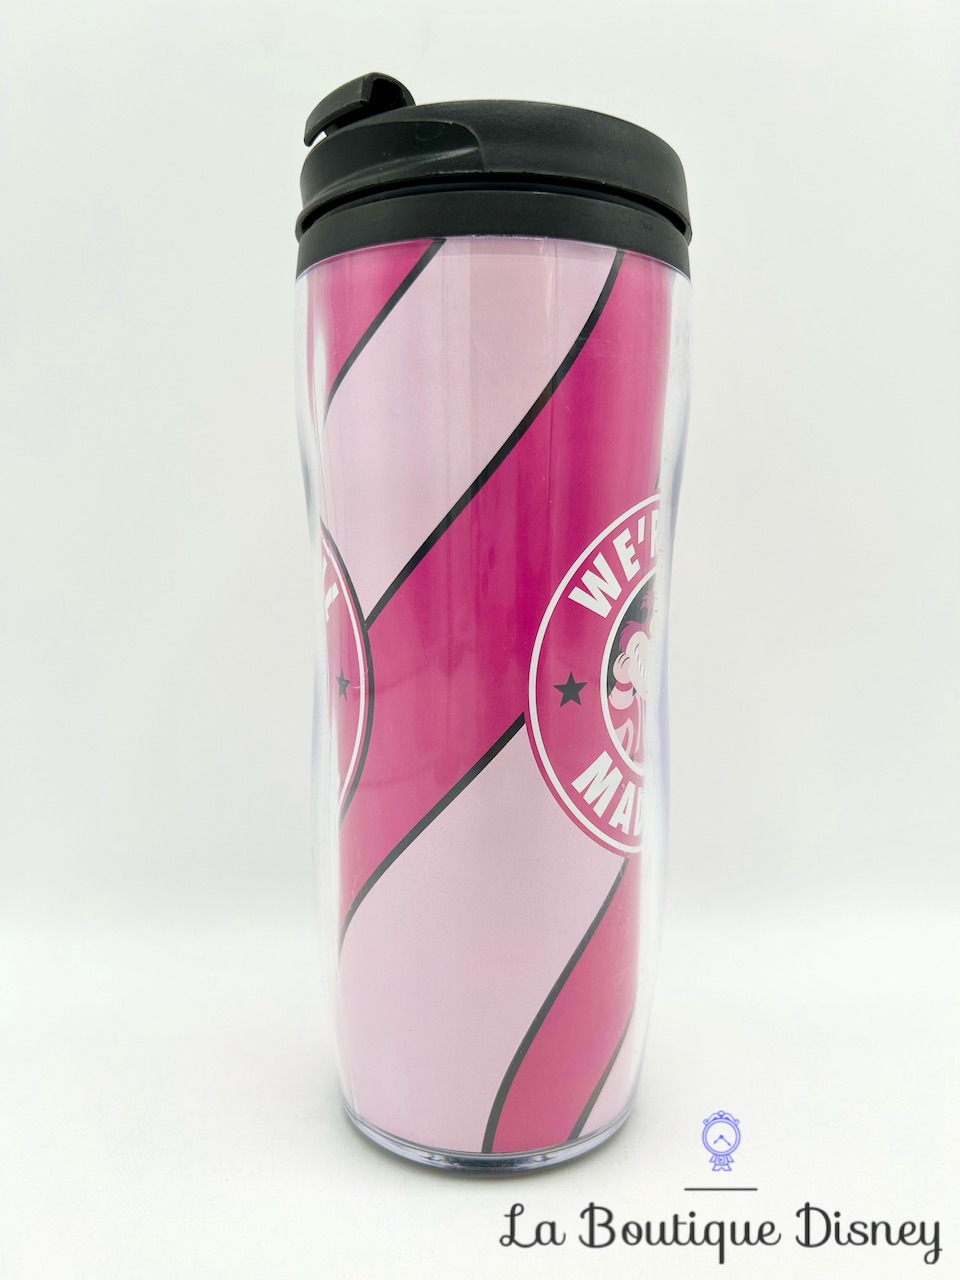 thermos-chat-cheshire-were-all-mad-here-disney-abystyle-mug-voyage-rose-alice-au-pays-des-merveilles-1